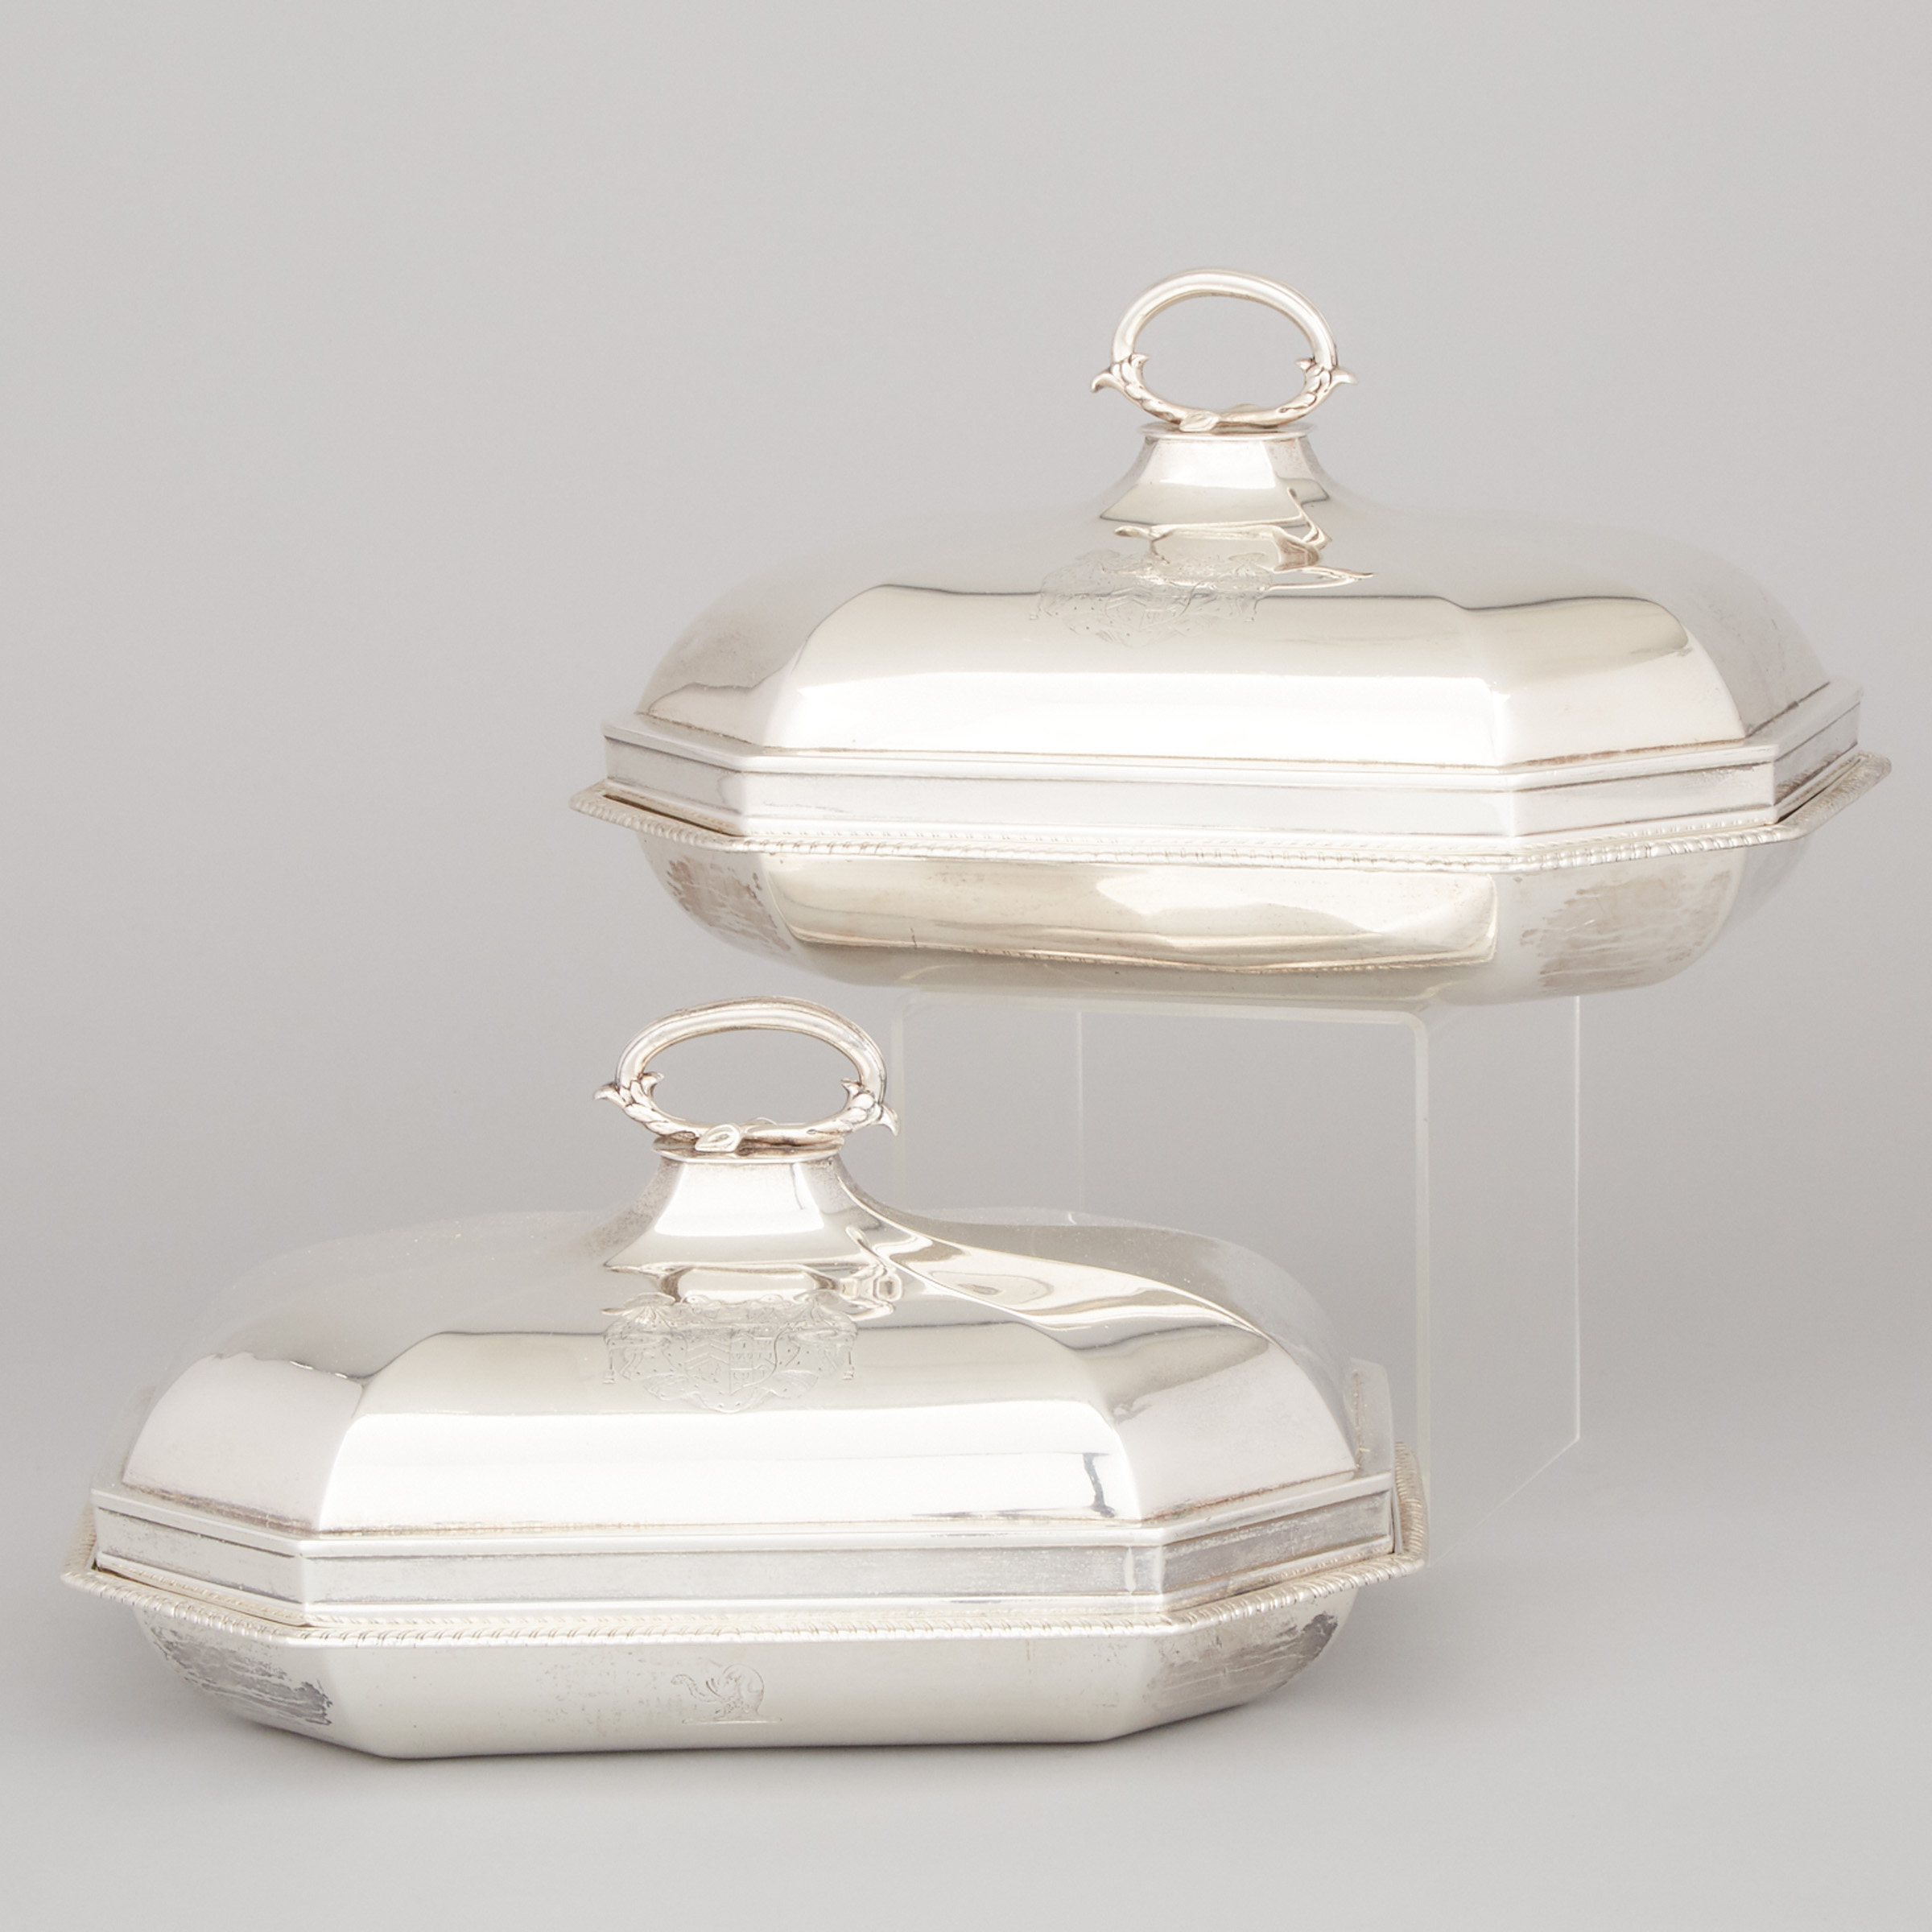 Pair of George III Silver Covered Entrée Dishes, Richard Cooke, London, 1799